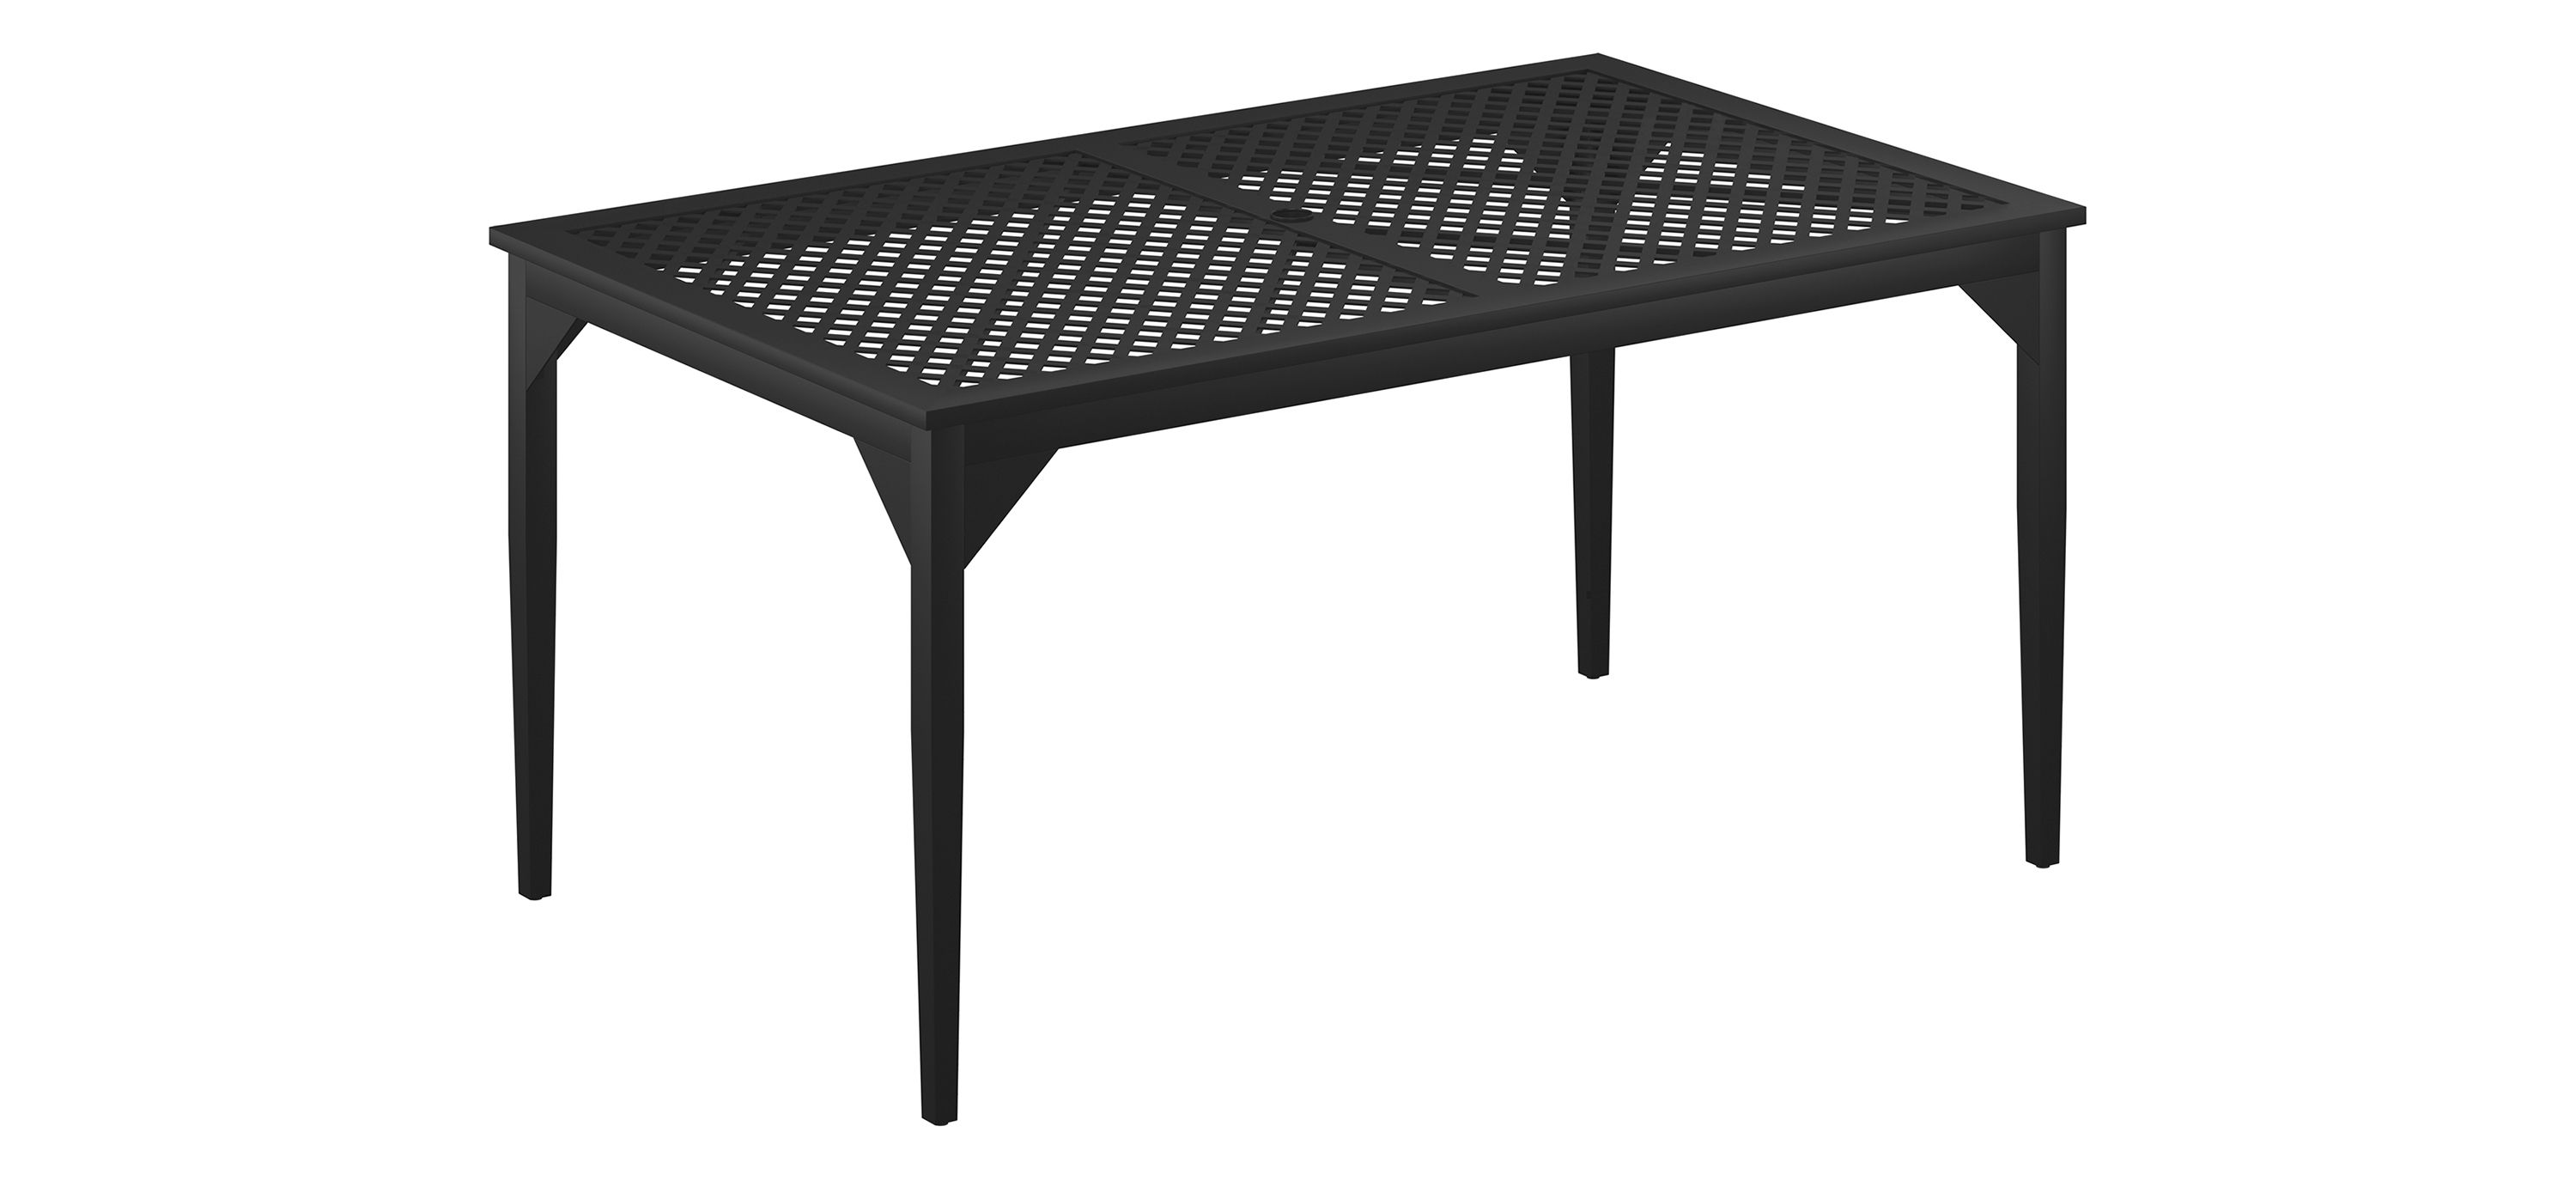 Wesson Rectangular Outdoor Dining Table